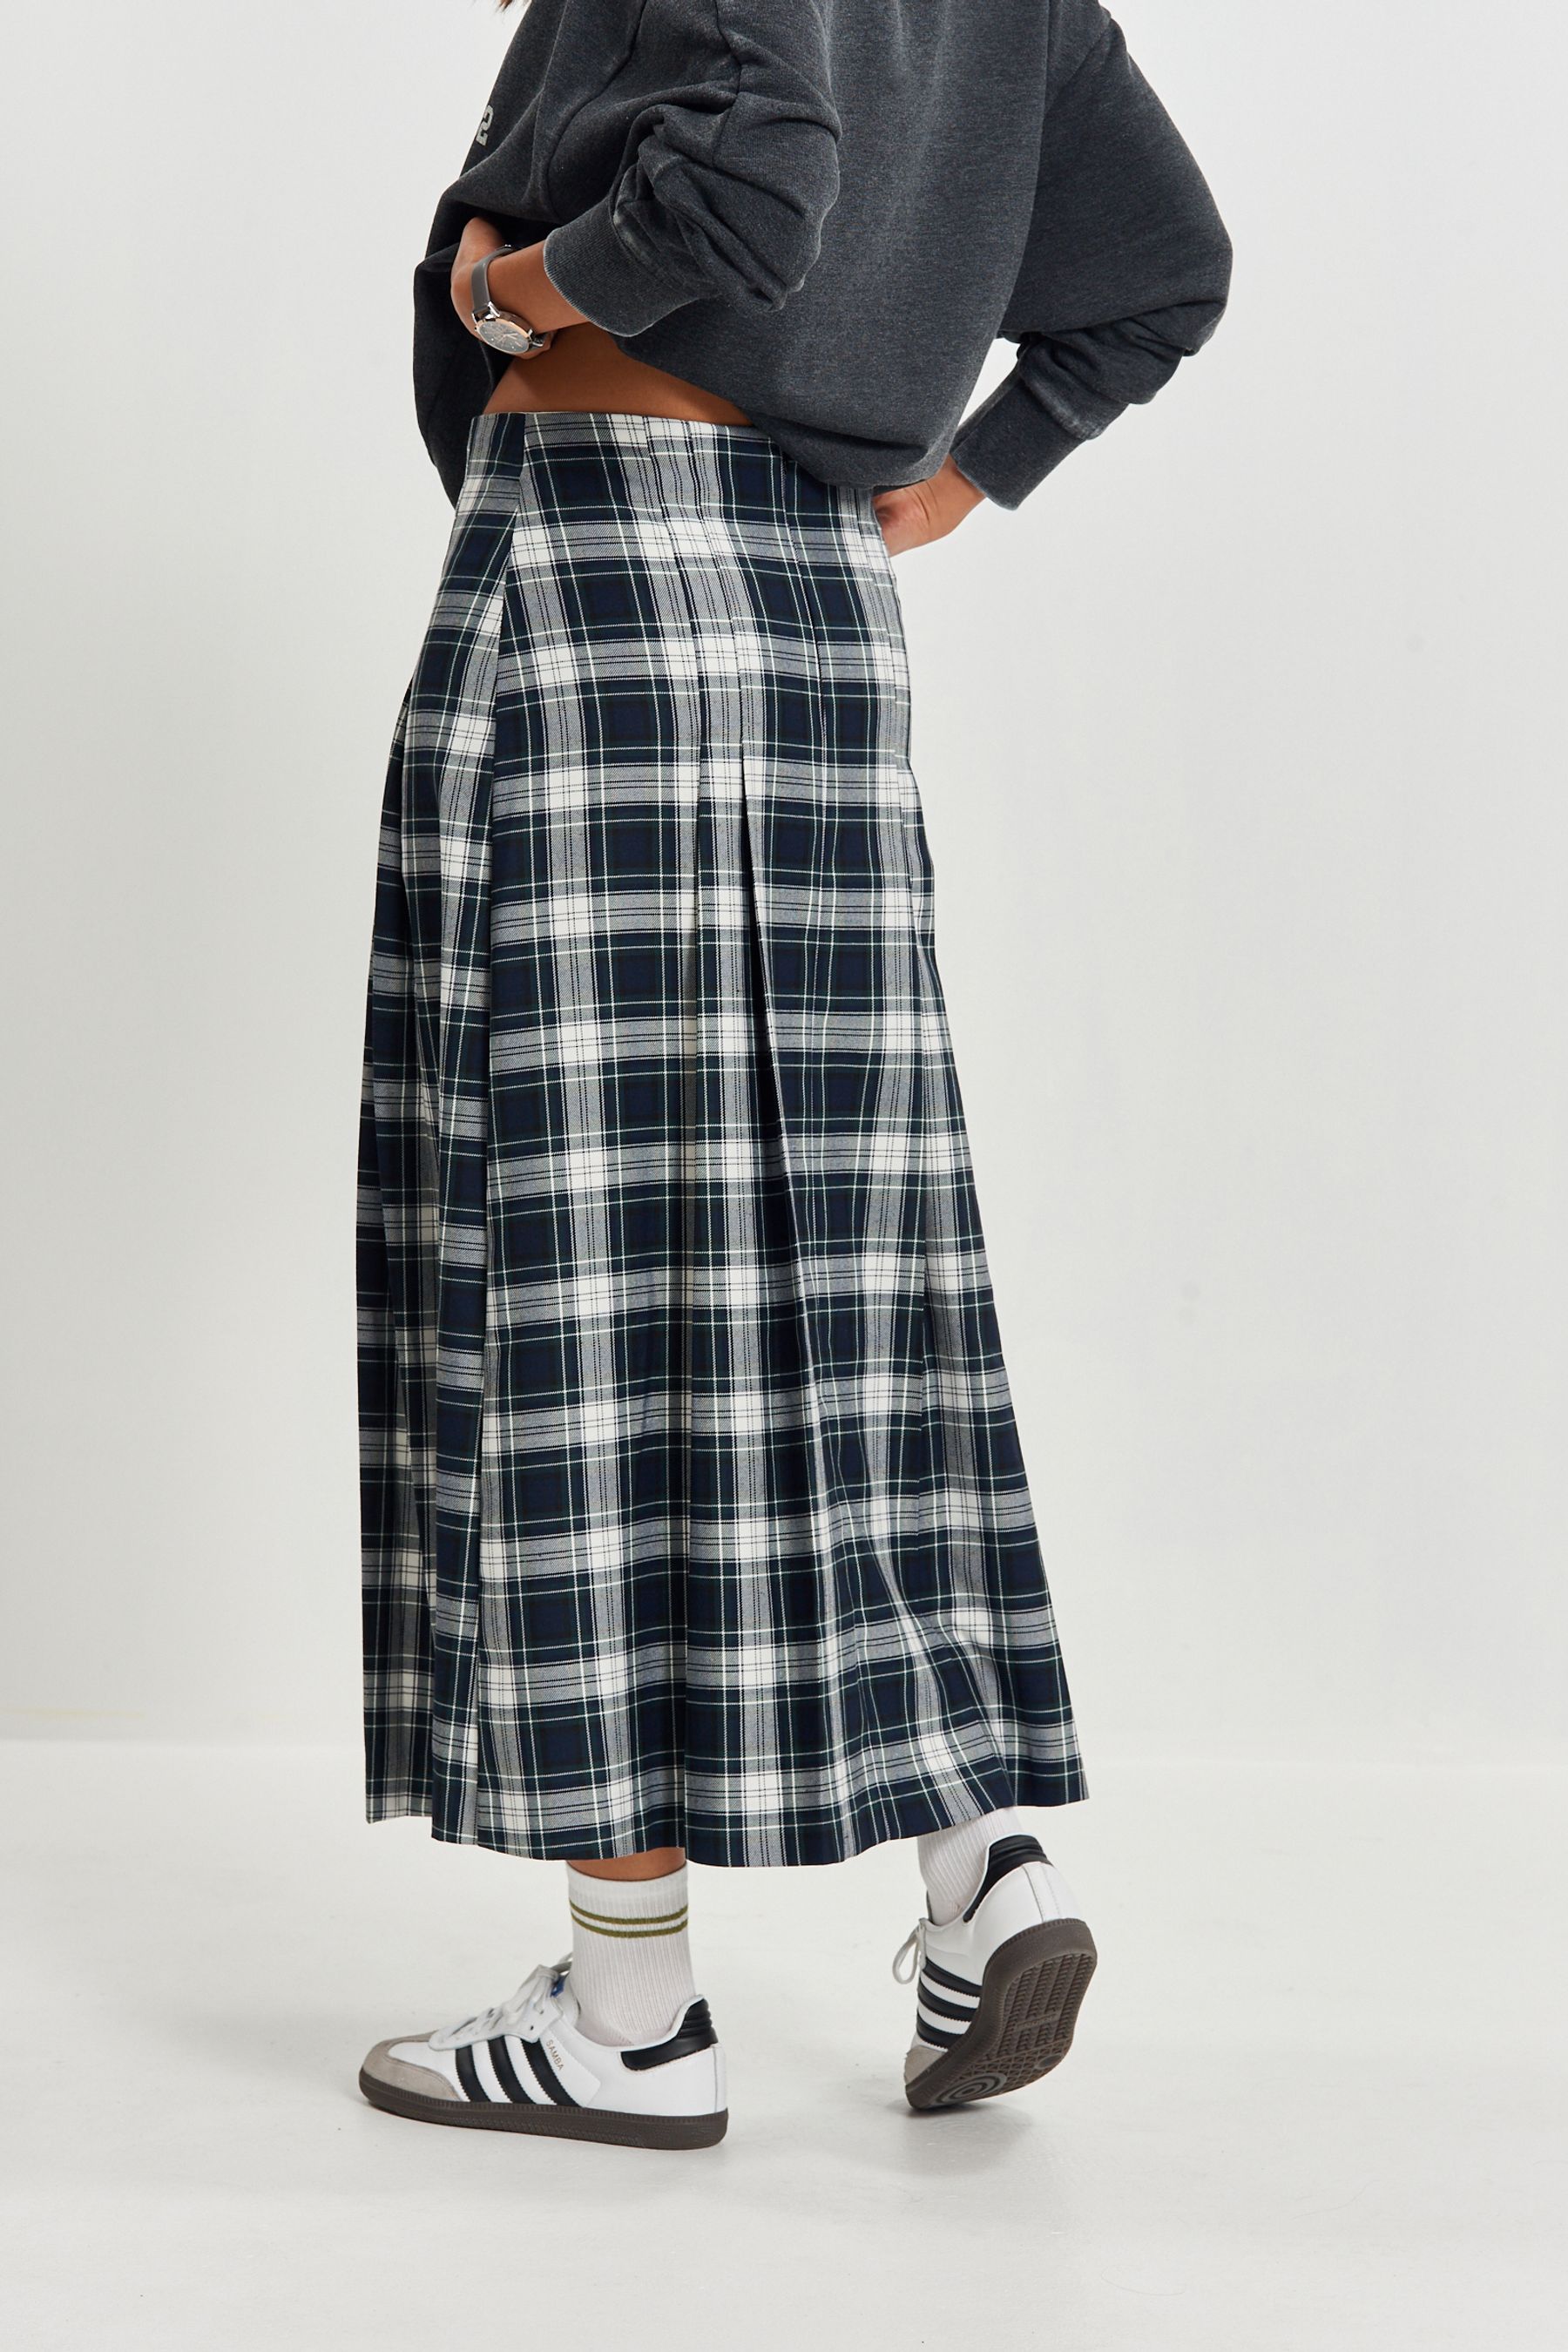 Blue Check Maxi Skirt - Image 3 of 6